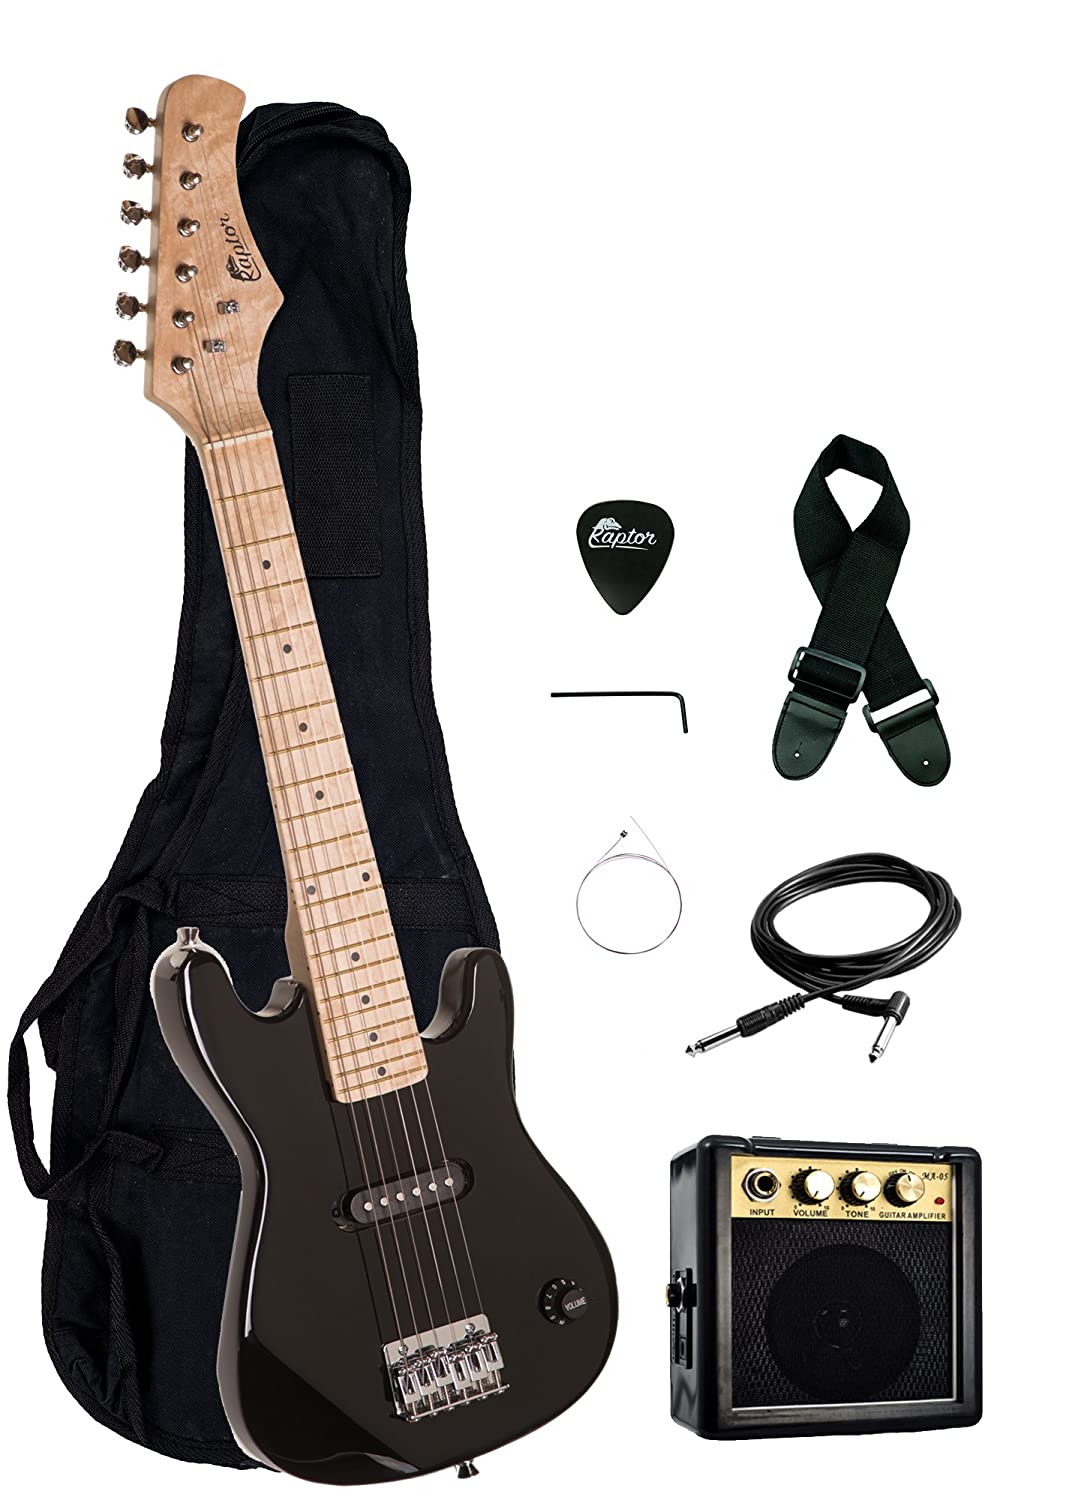 30" Kids 1/2 Size ULTIMATE Electric Guitar Package with 3W Amp, Gig Bag, Strap, Cable and Exclusive RAPTOR Picks (Black)